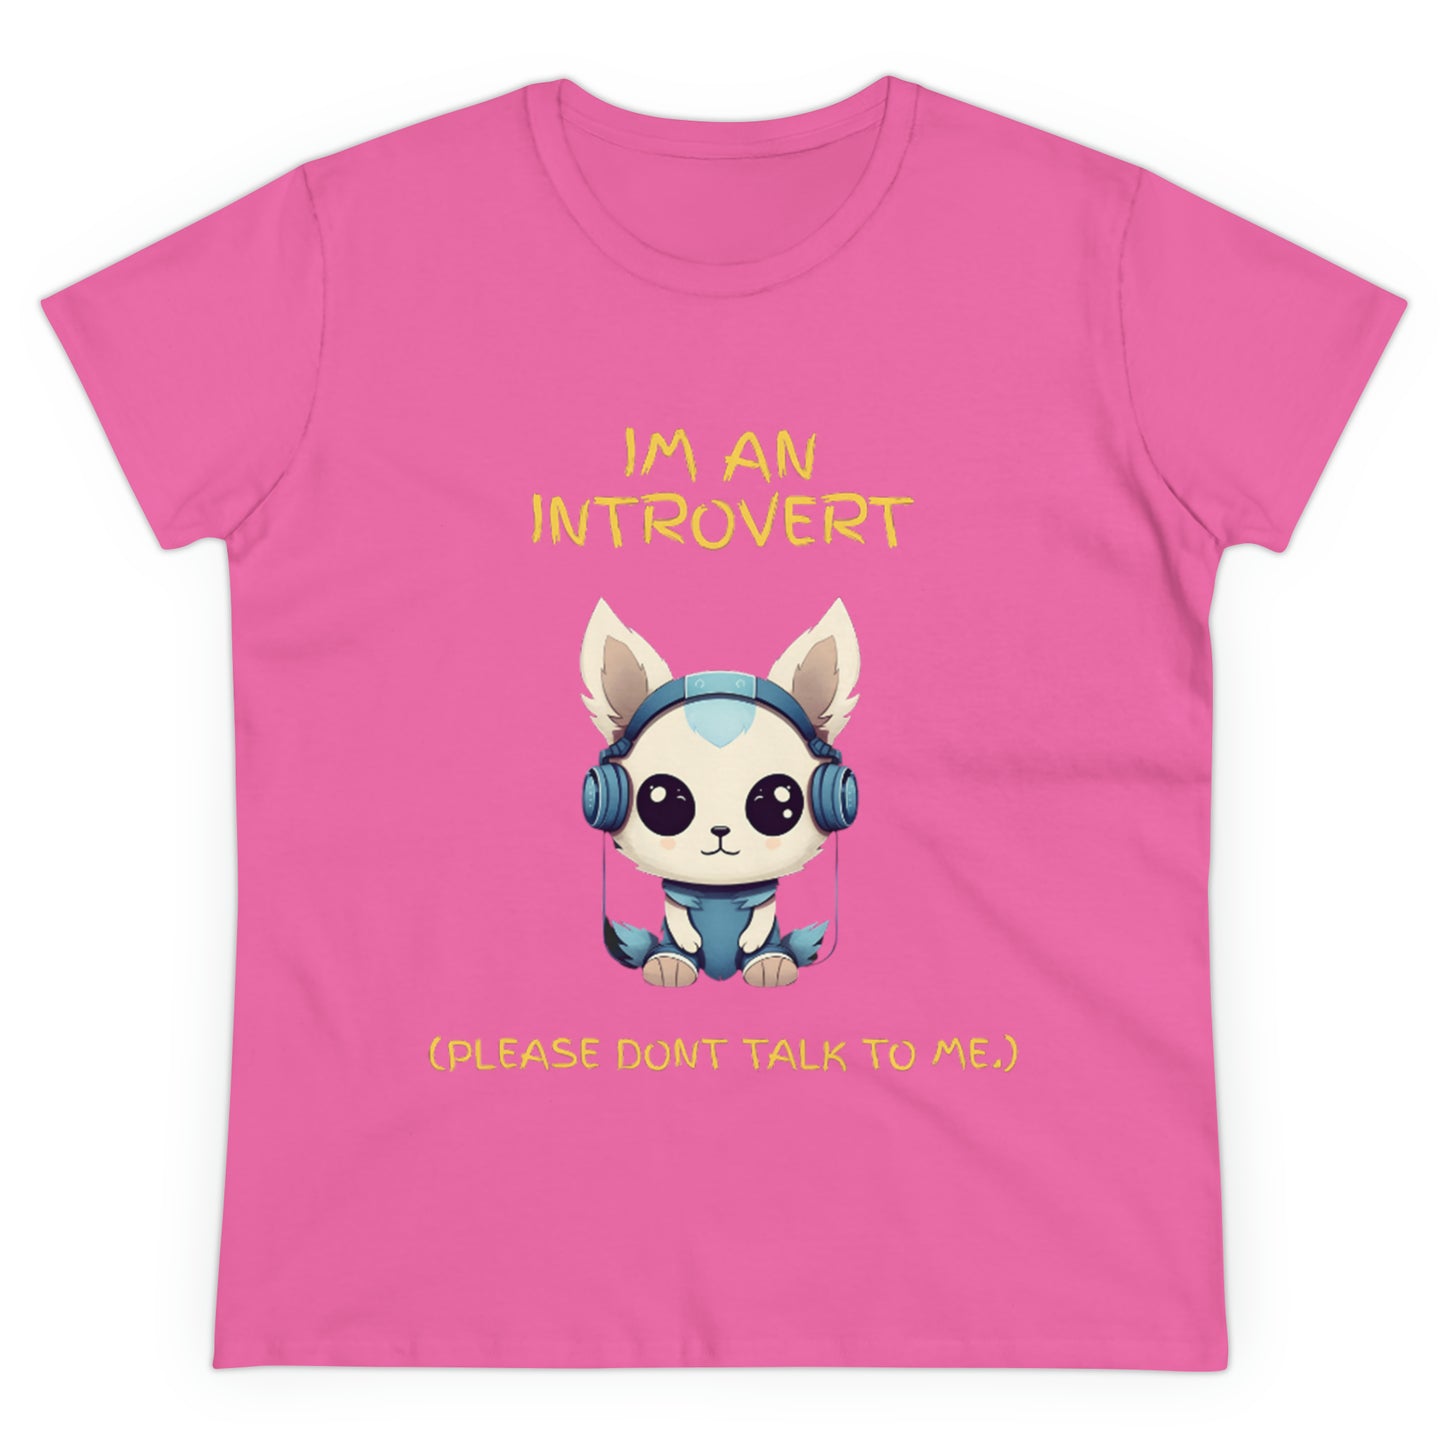 I'm an Introvert - Women's Semi-Fitted Tee